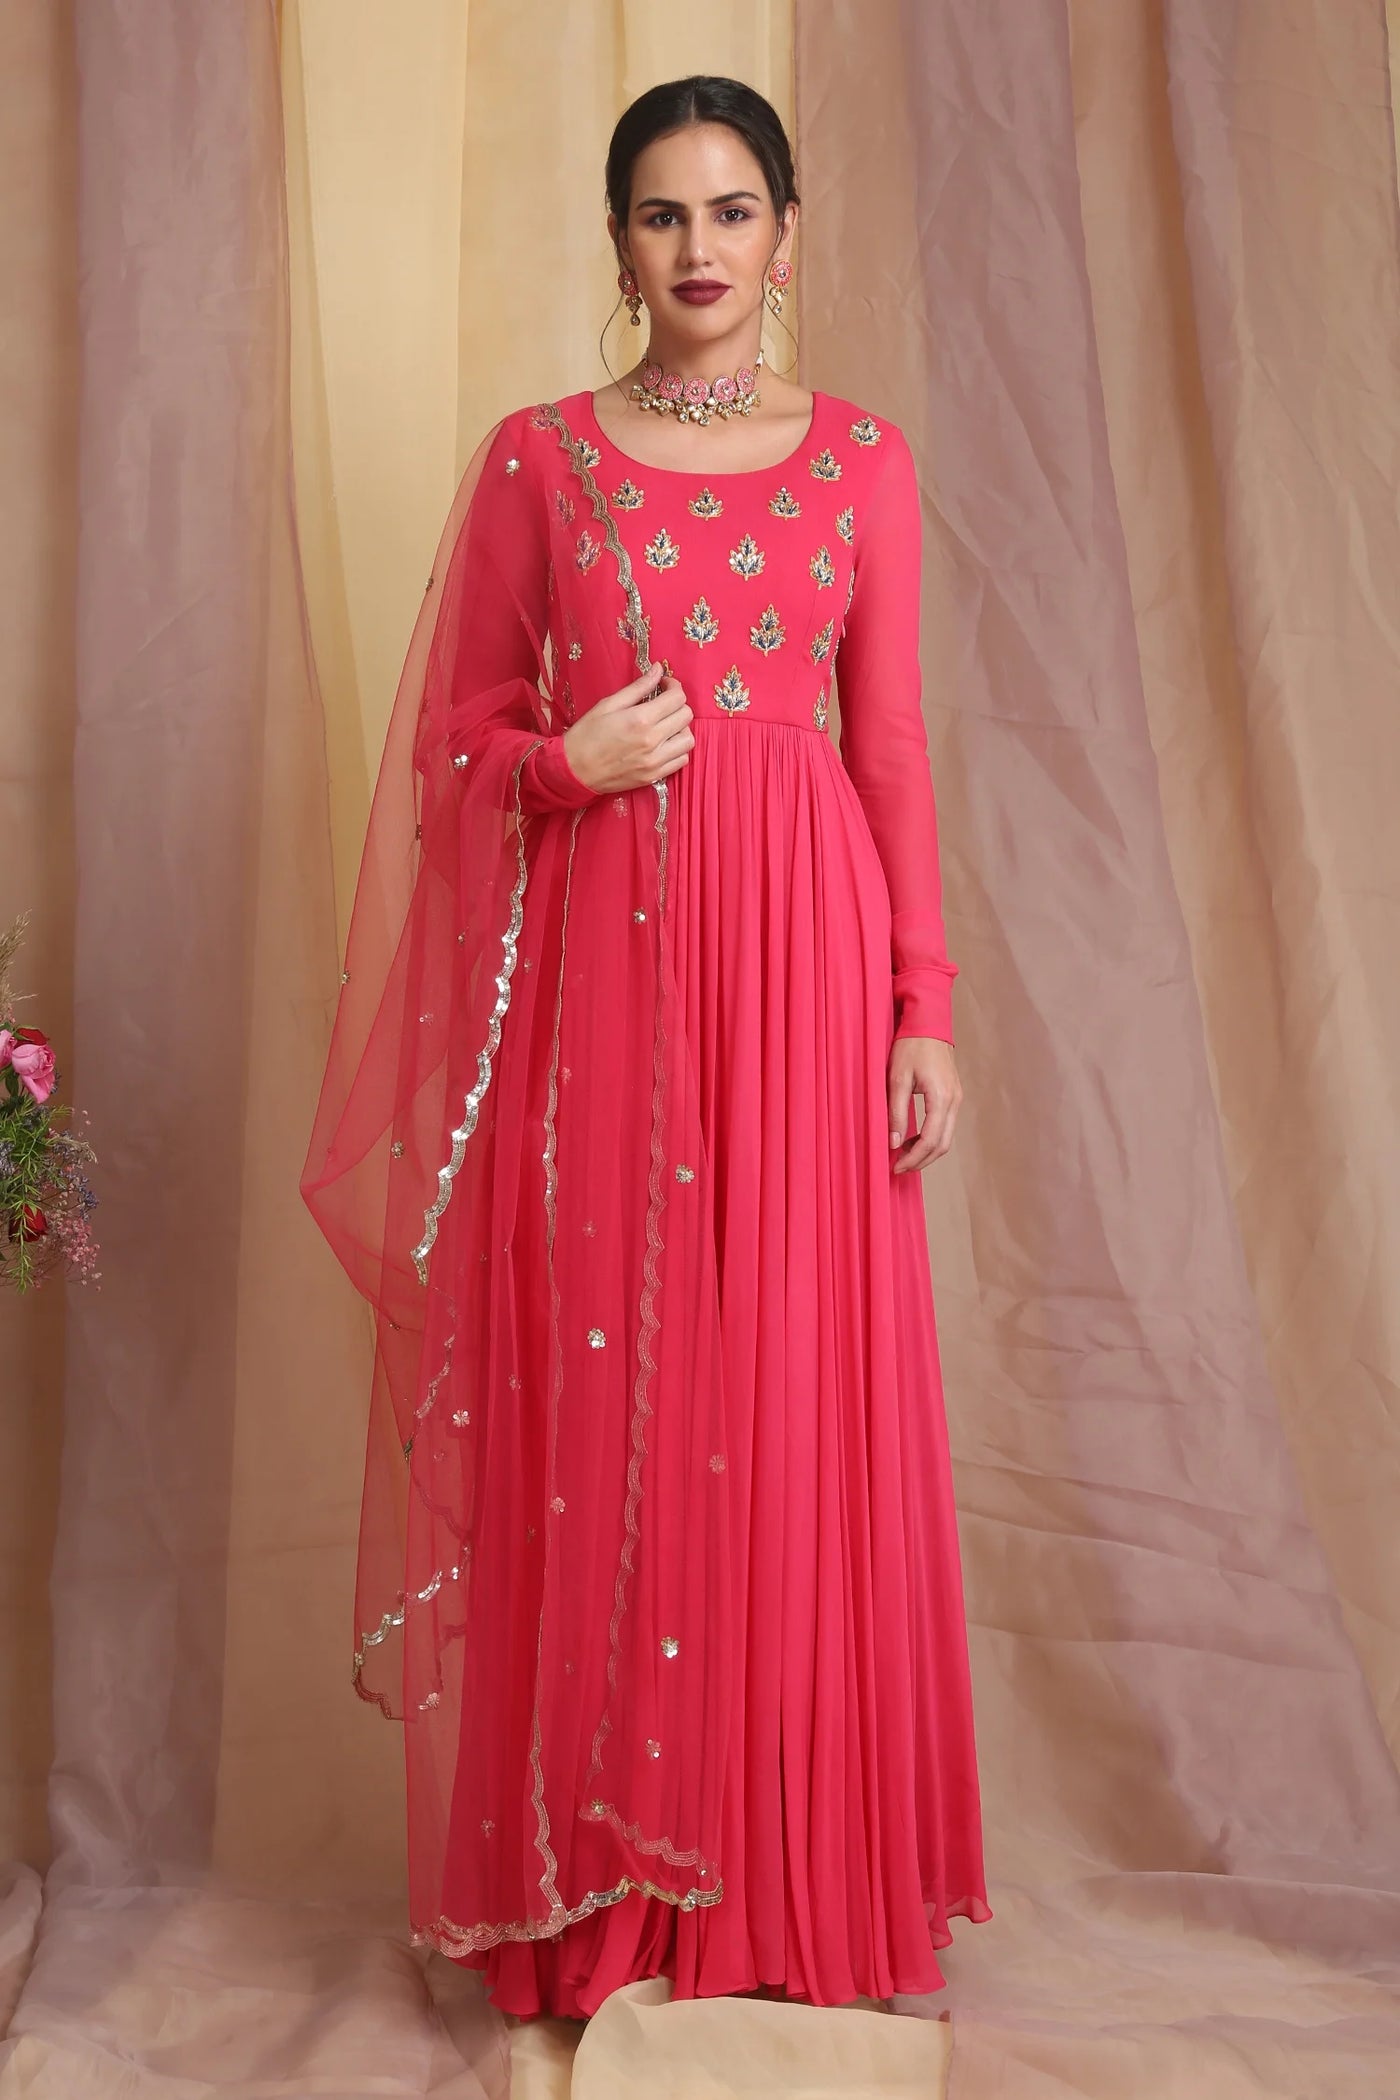 Cherry Red Embroidered Anarkali Indian Clothing in Denver, CO, Aurora, CO, Boulder, CO, Fort Collins, CO, Colorado Springs, CO, Parker, CO, Highlands Ranch, CO, Cherry Creek, CO, Centennial, CO, and Longmont, CO. NATIONWIDE SHIPPING USA- India Fashion X